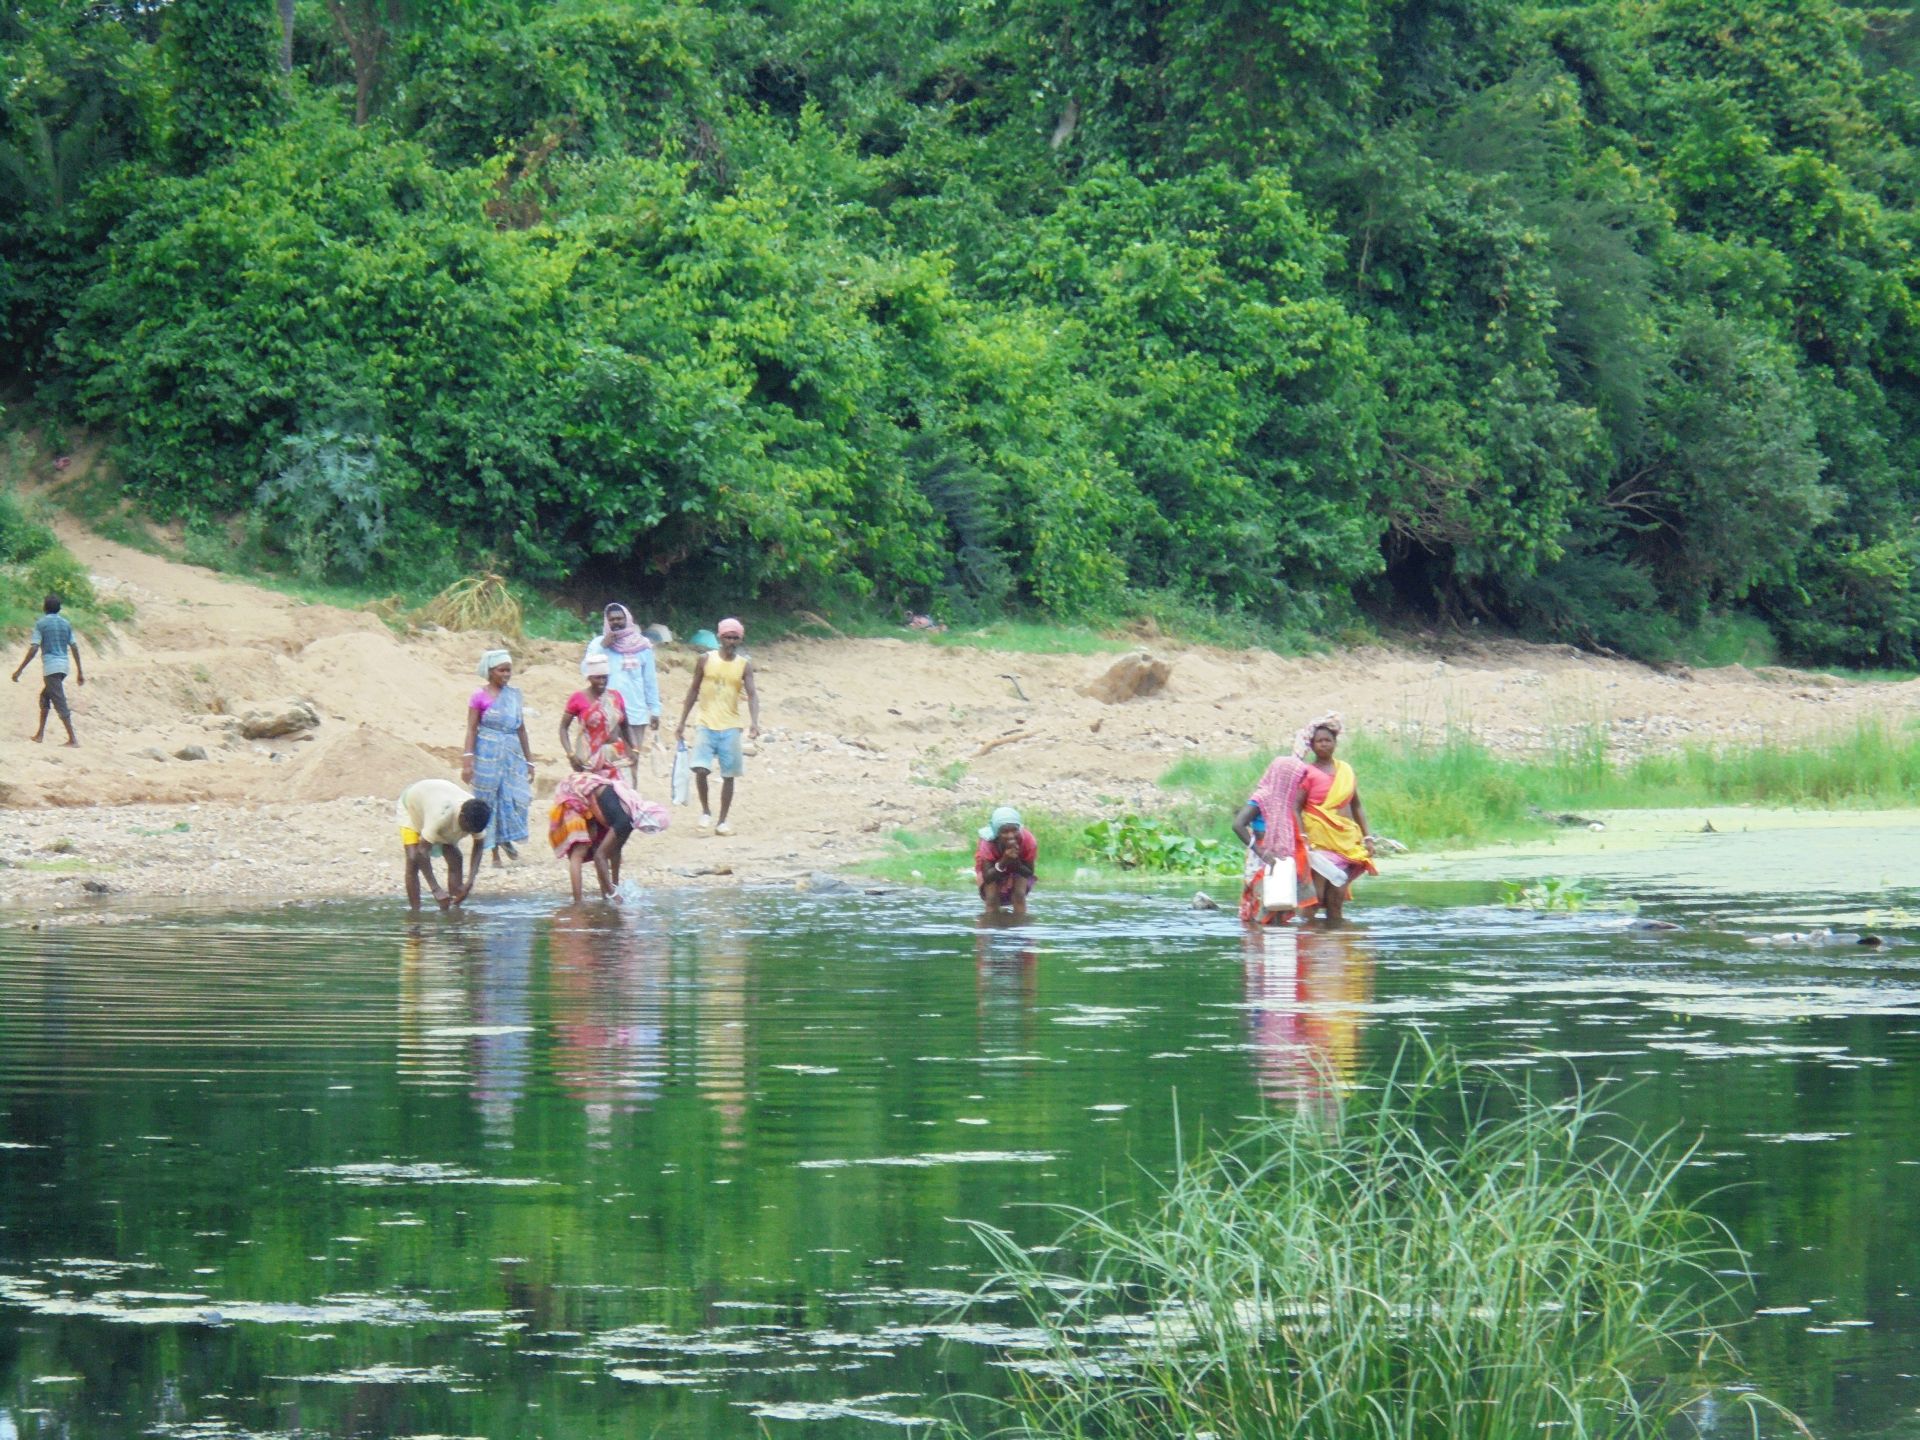 The villagers near the river Gara. They say that the waste slurry from the plant meets the river. Clearly the waters are not out of reach for the villagers.